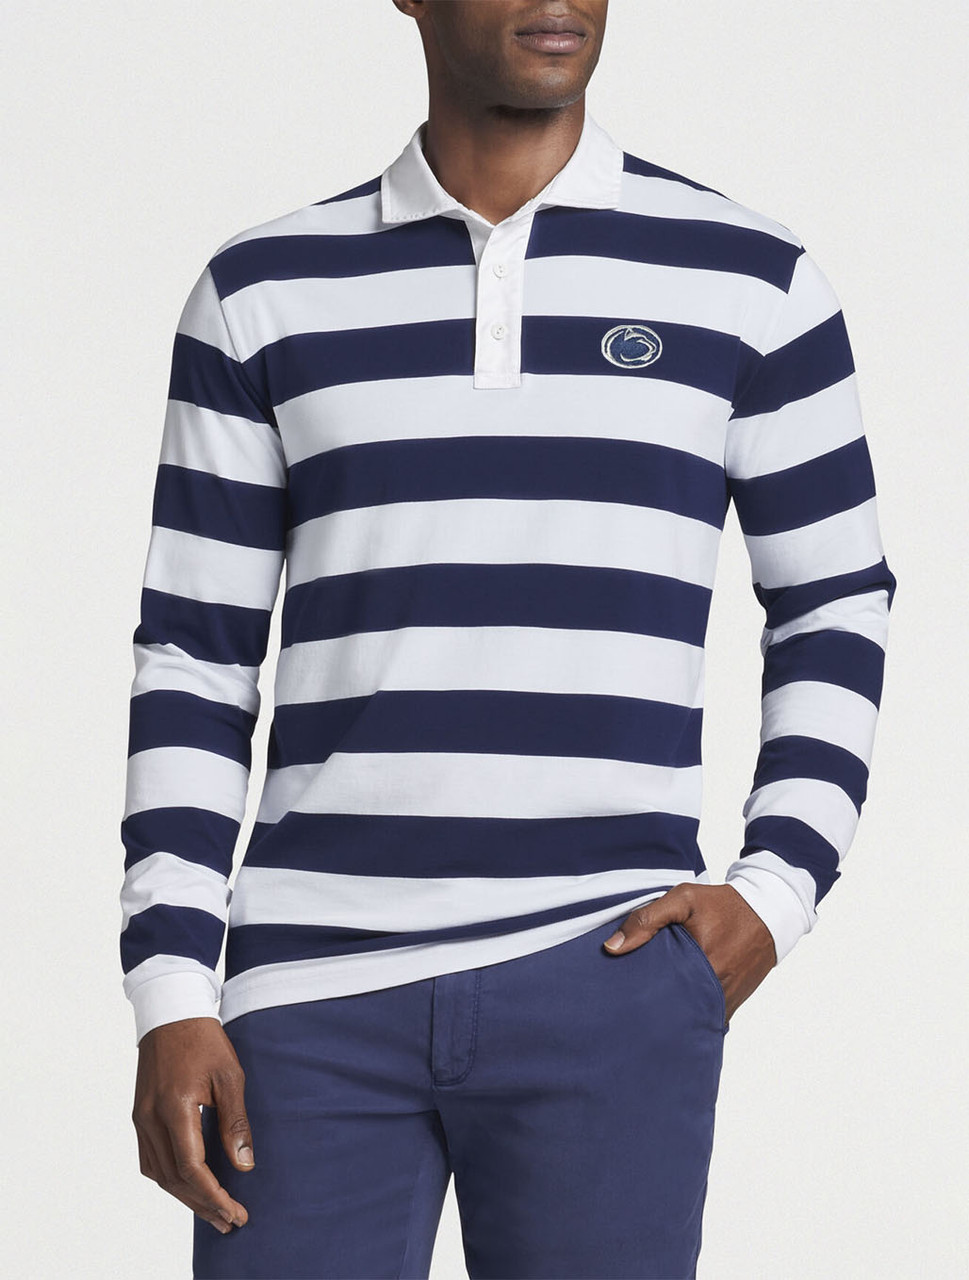 Penn State Rugby Shirt | Peter Millar - Harpers